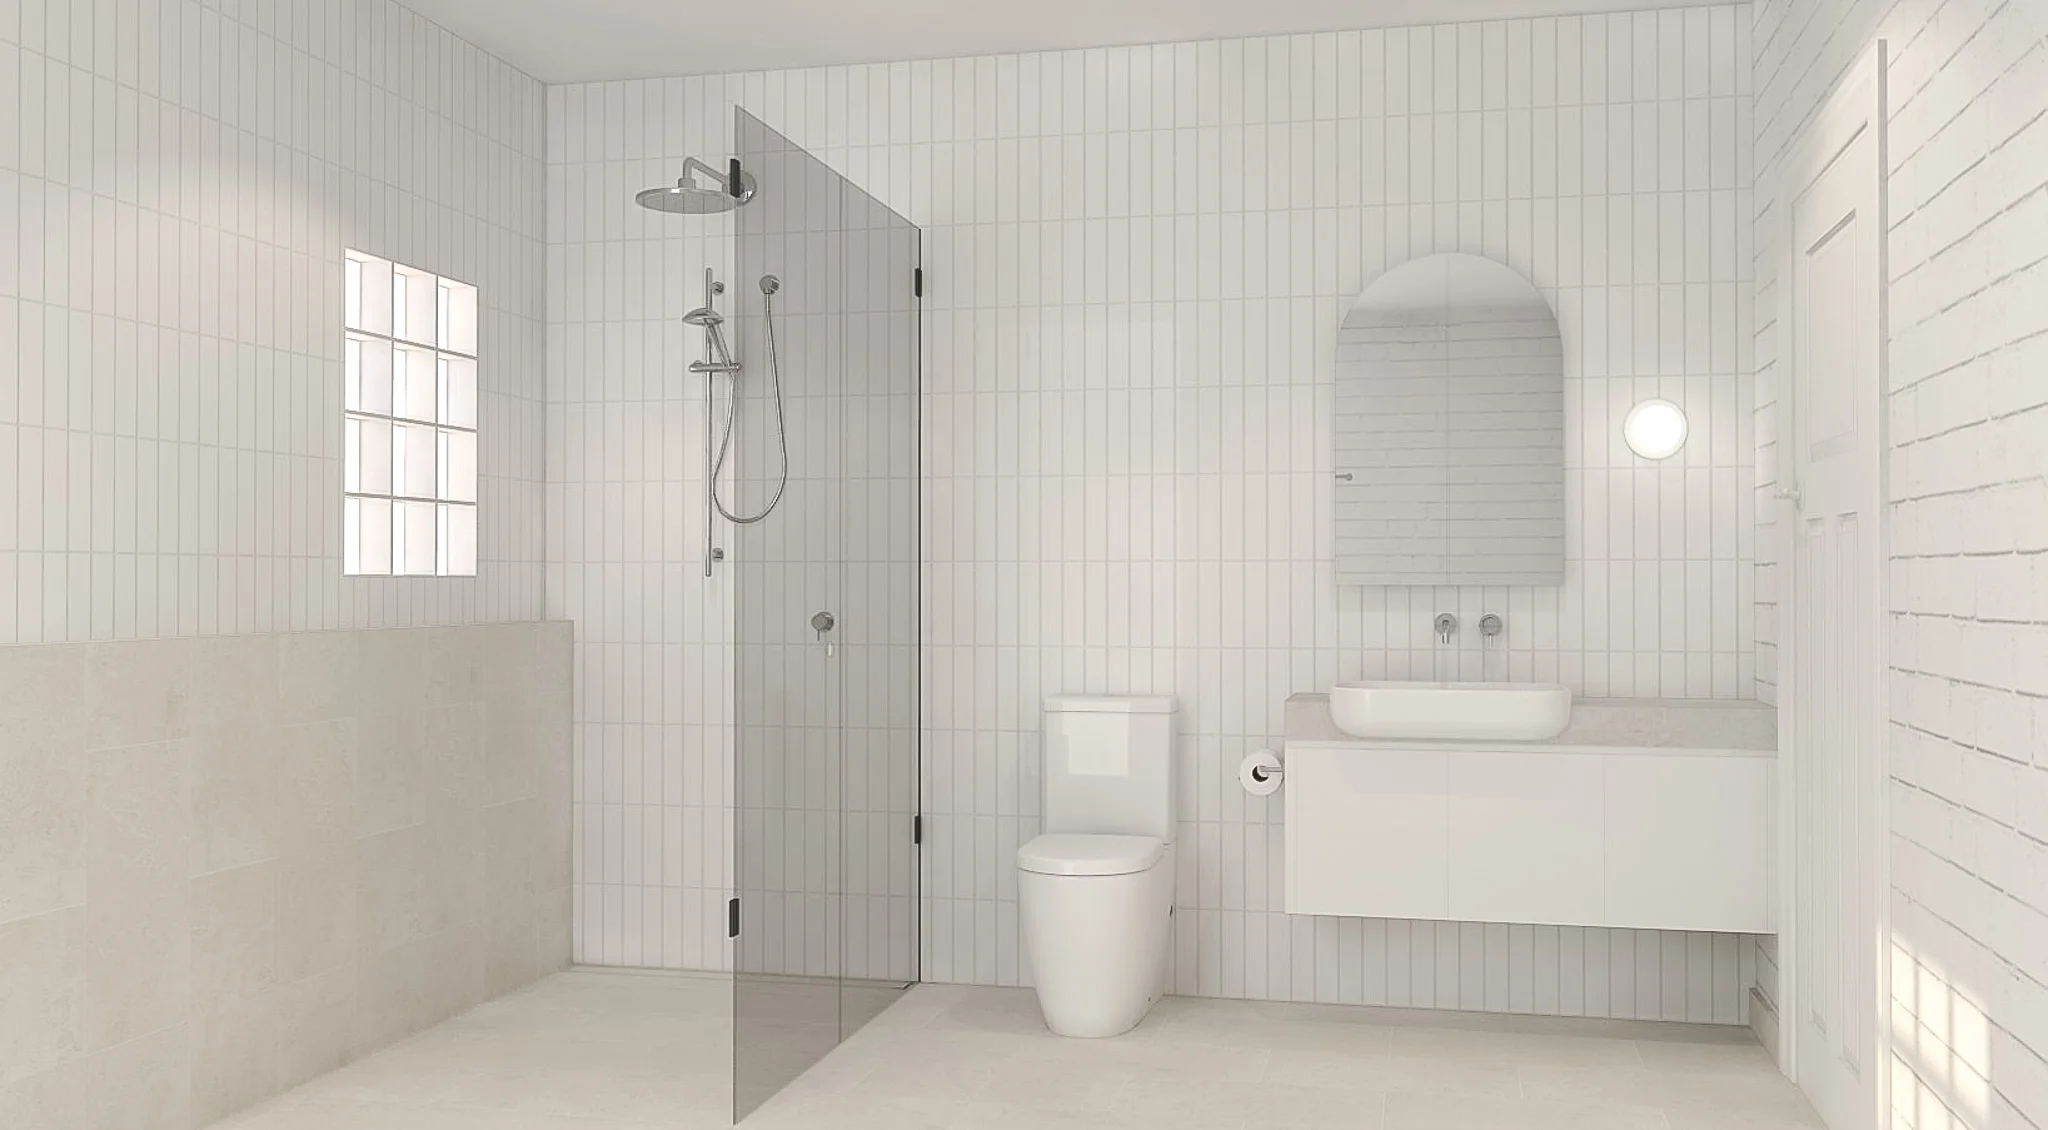 Contemporary bathroom design render featuring walk in shower, ledge wall with glass brick window, a toilet and a white vanity with arch mirror cabinet.